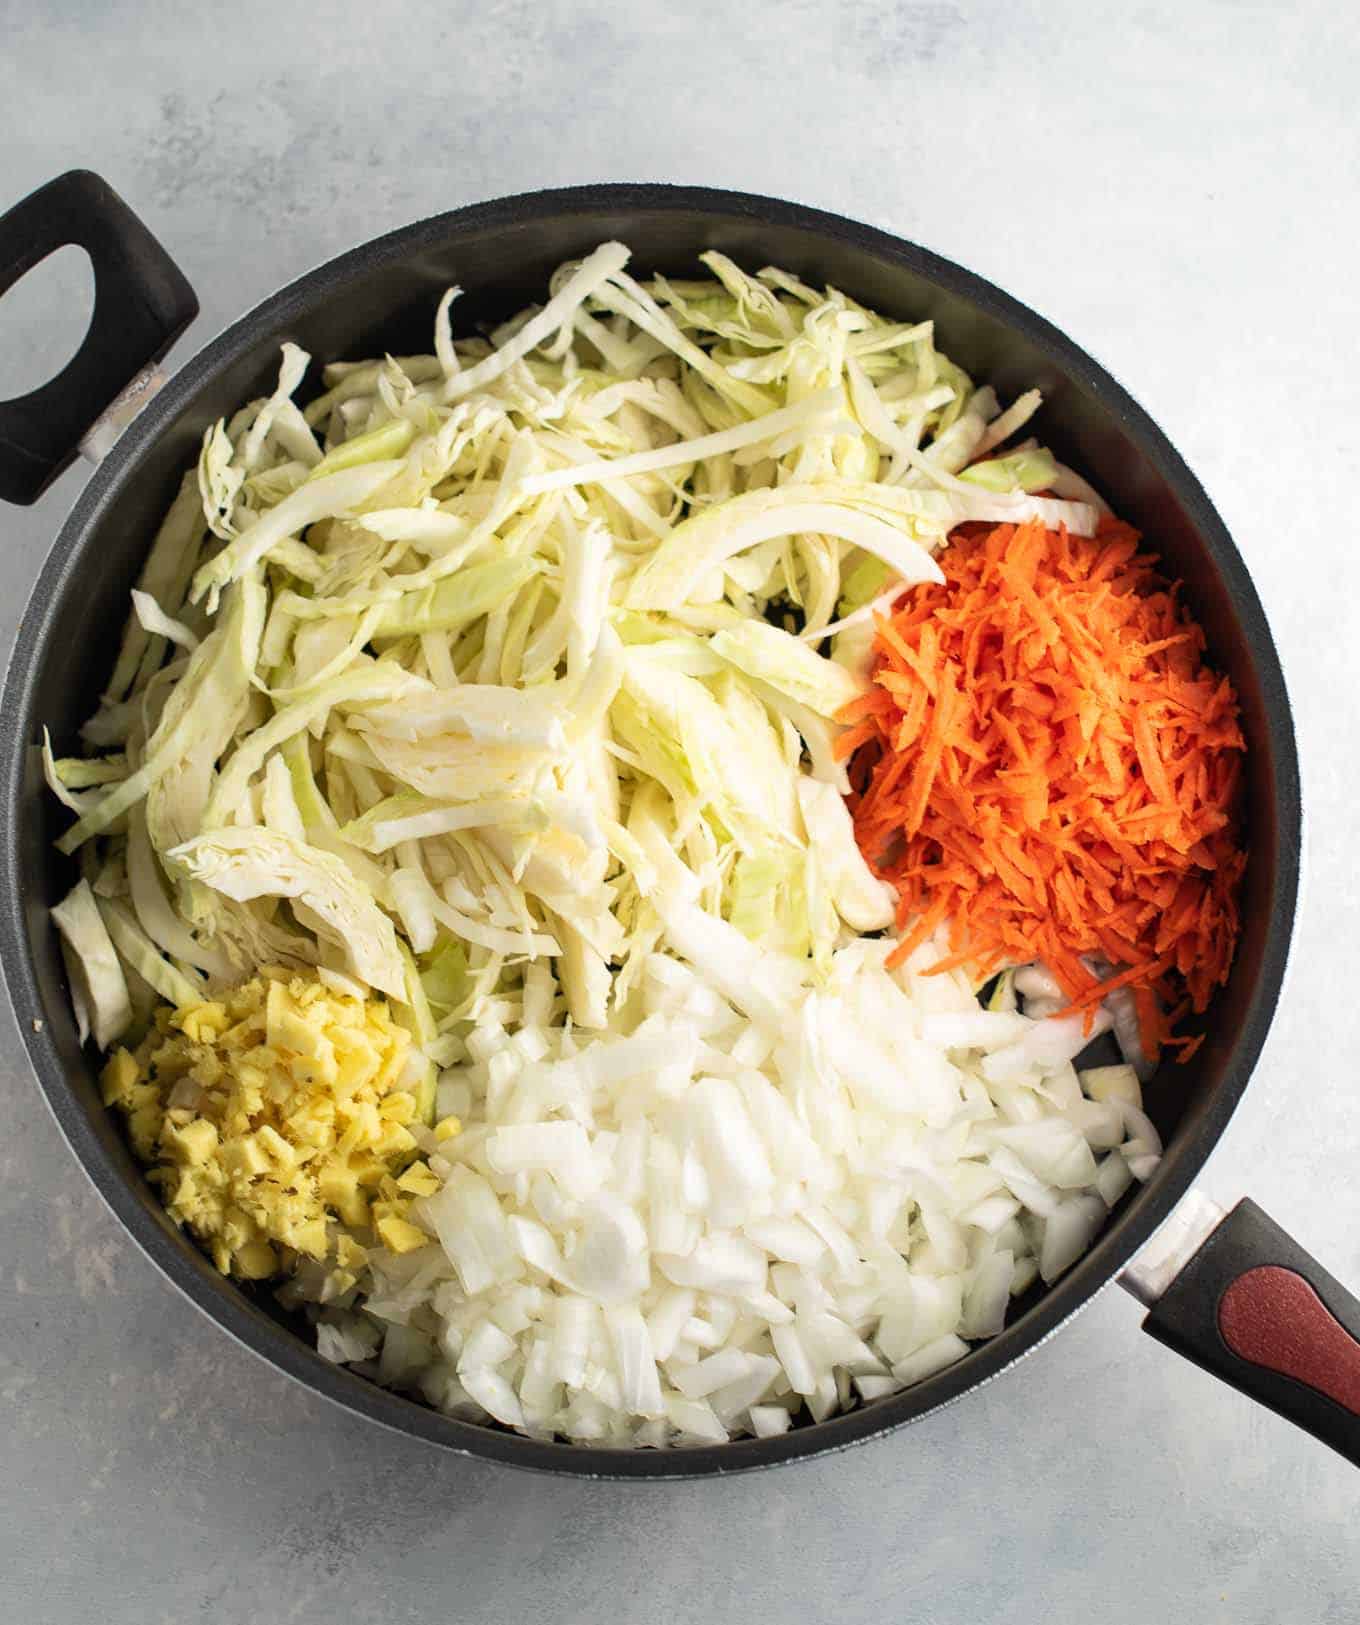 raw ginger, onion, cabbage, and carrots in a large skillet